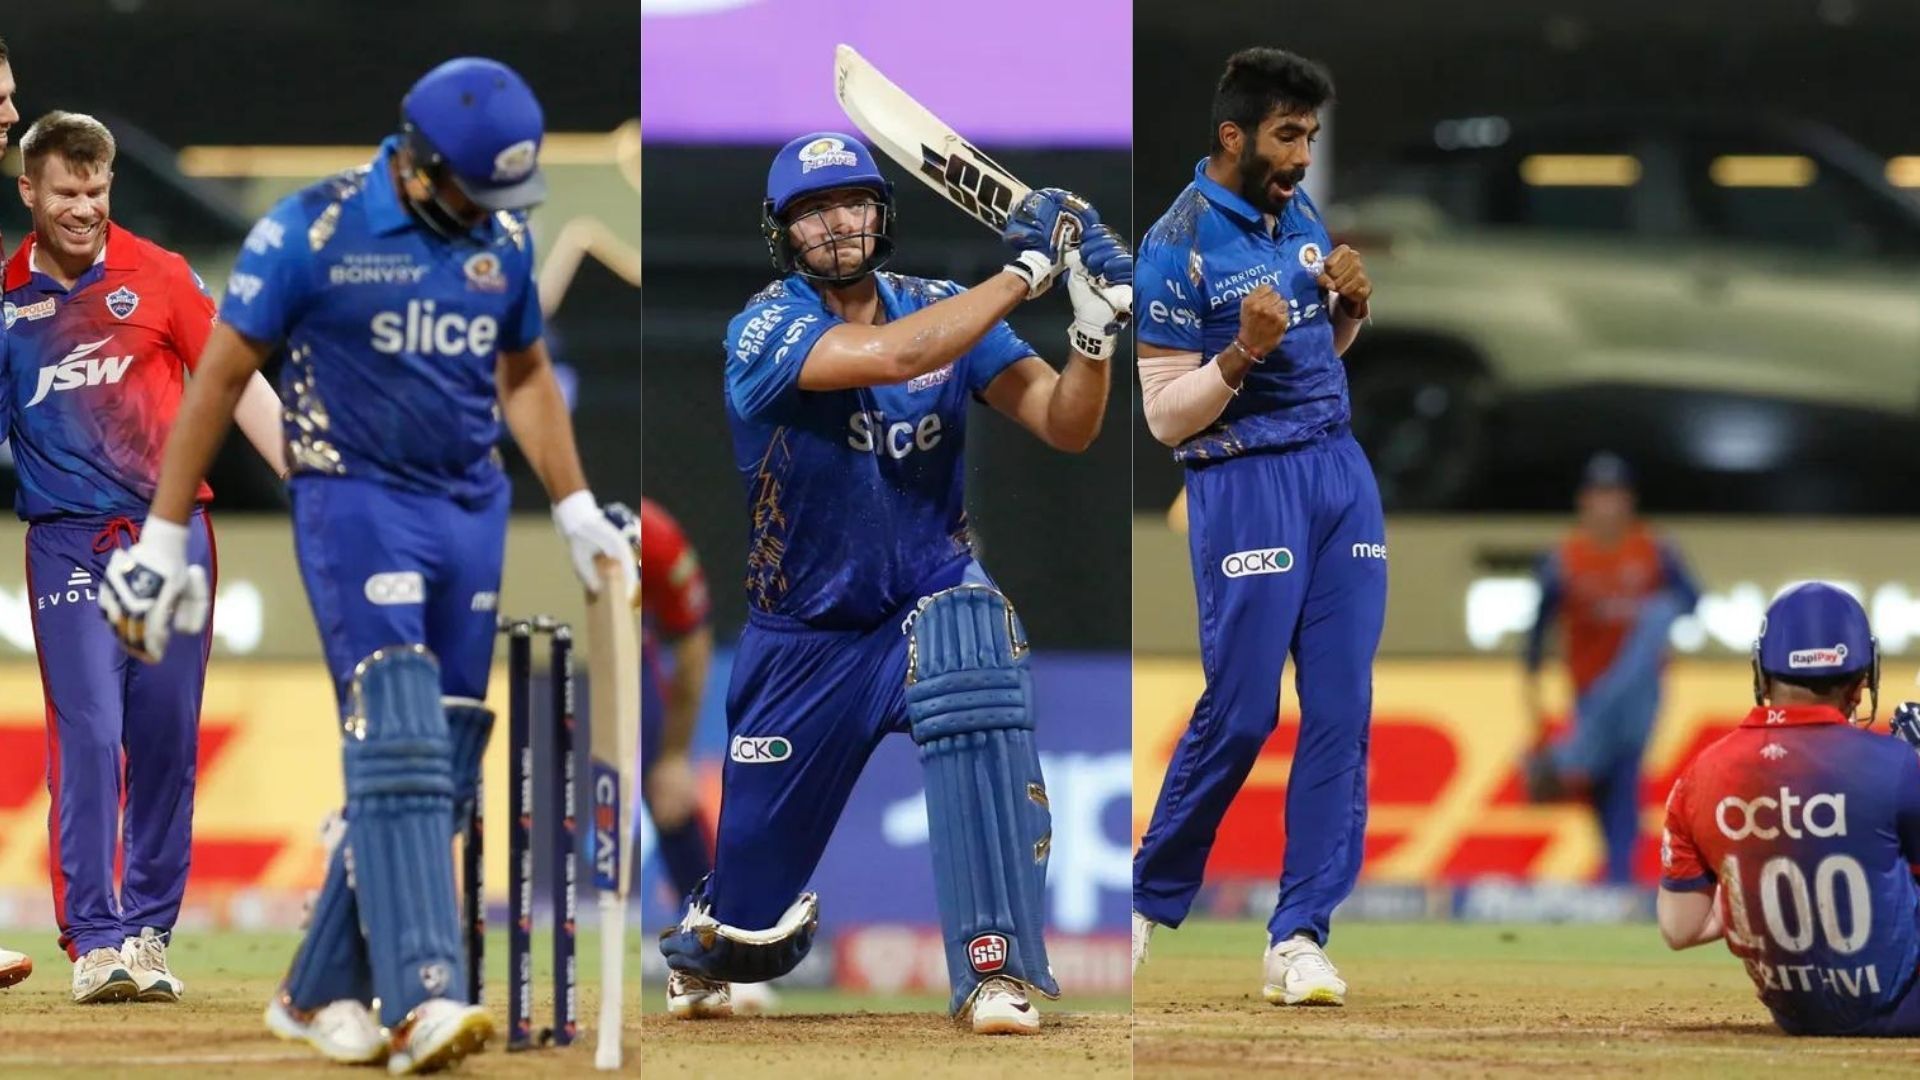 Positives and negatives from Mi&#039;s win over DC. (P.C.:iplt20.com)